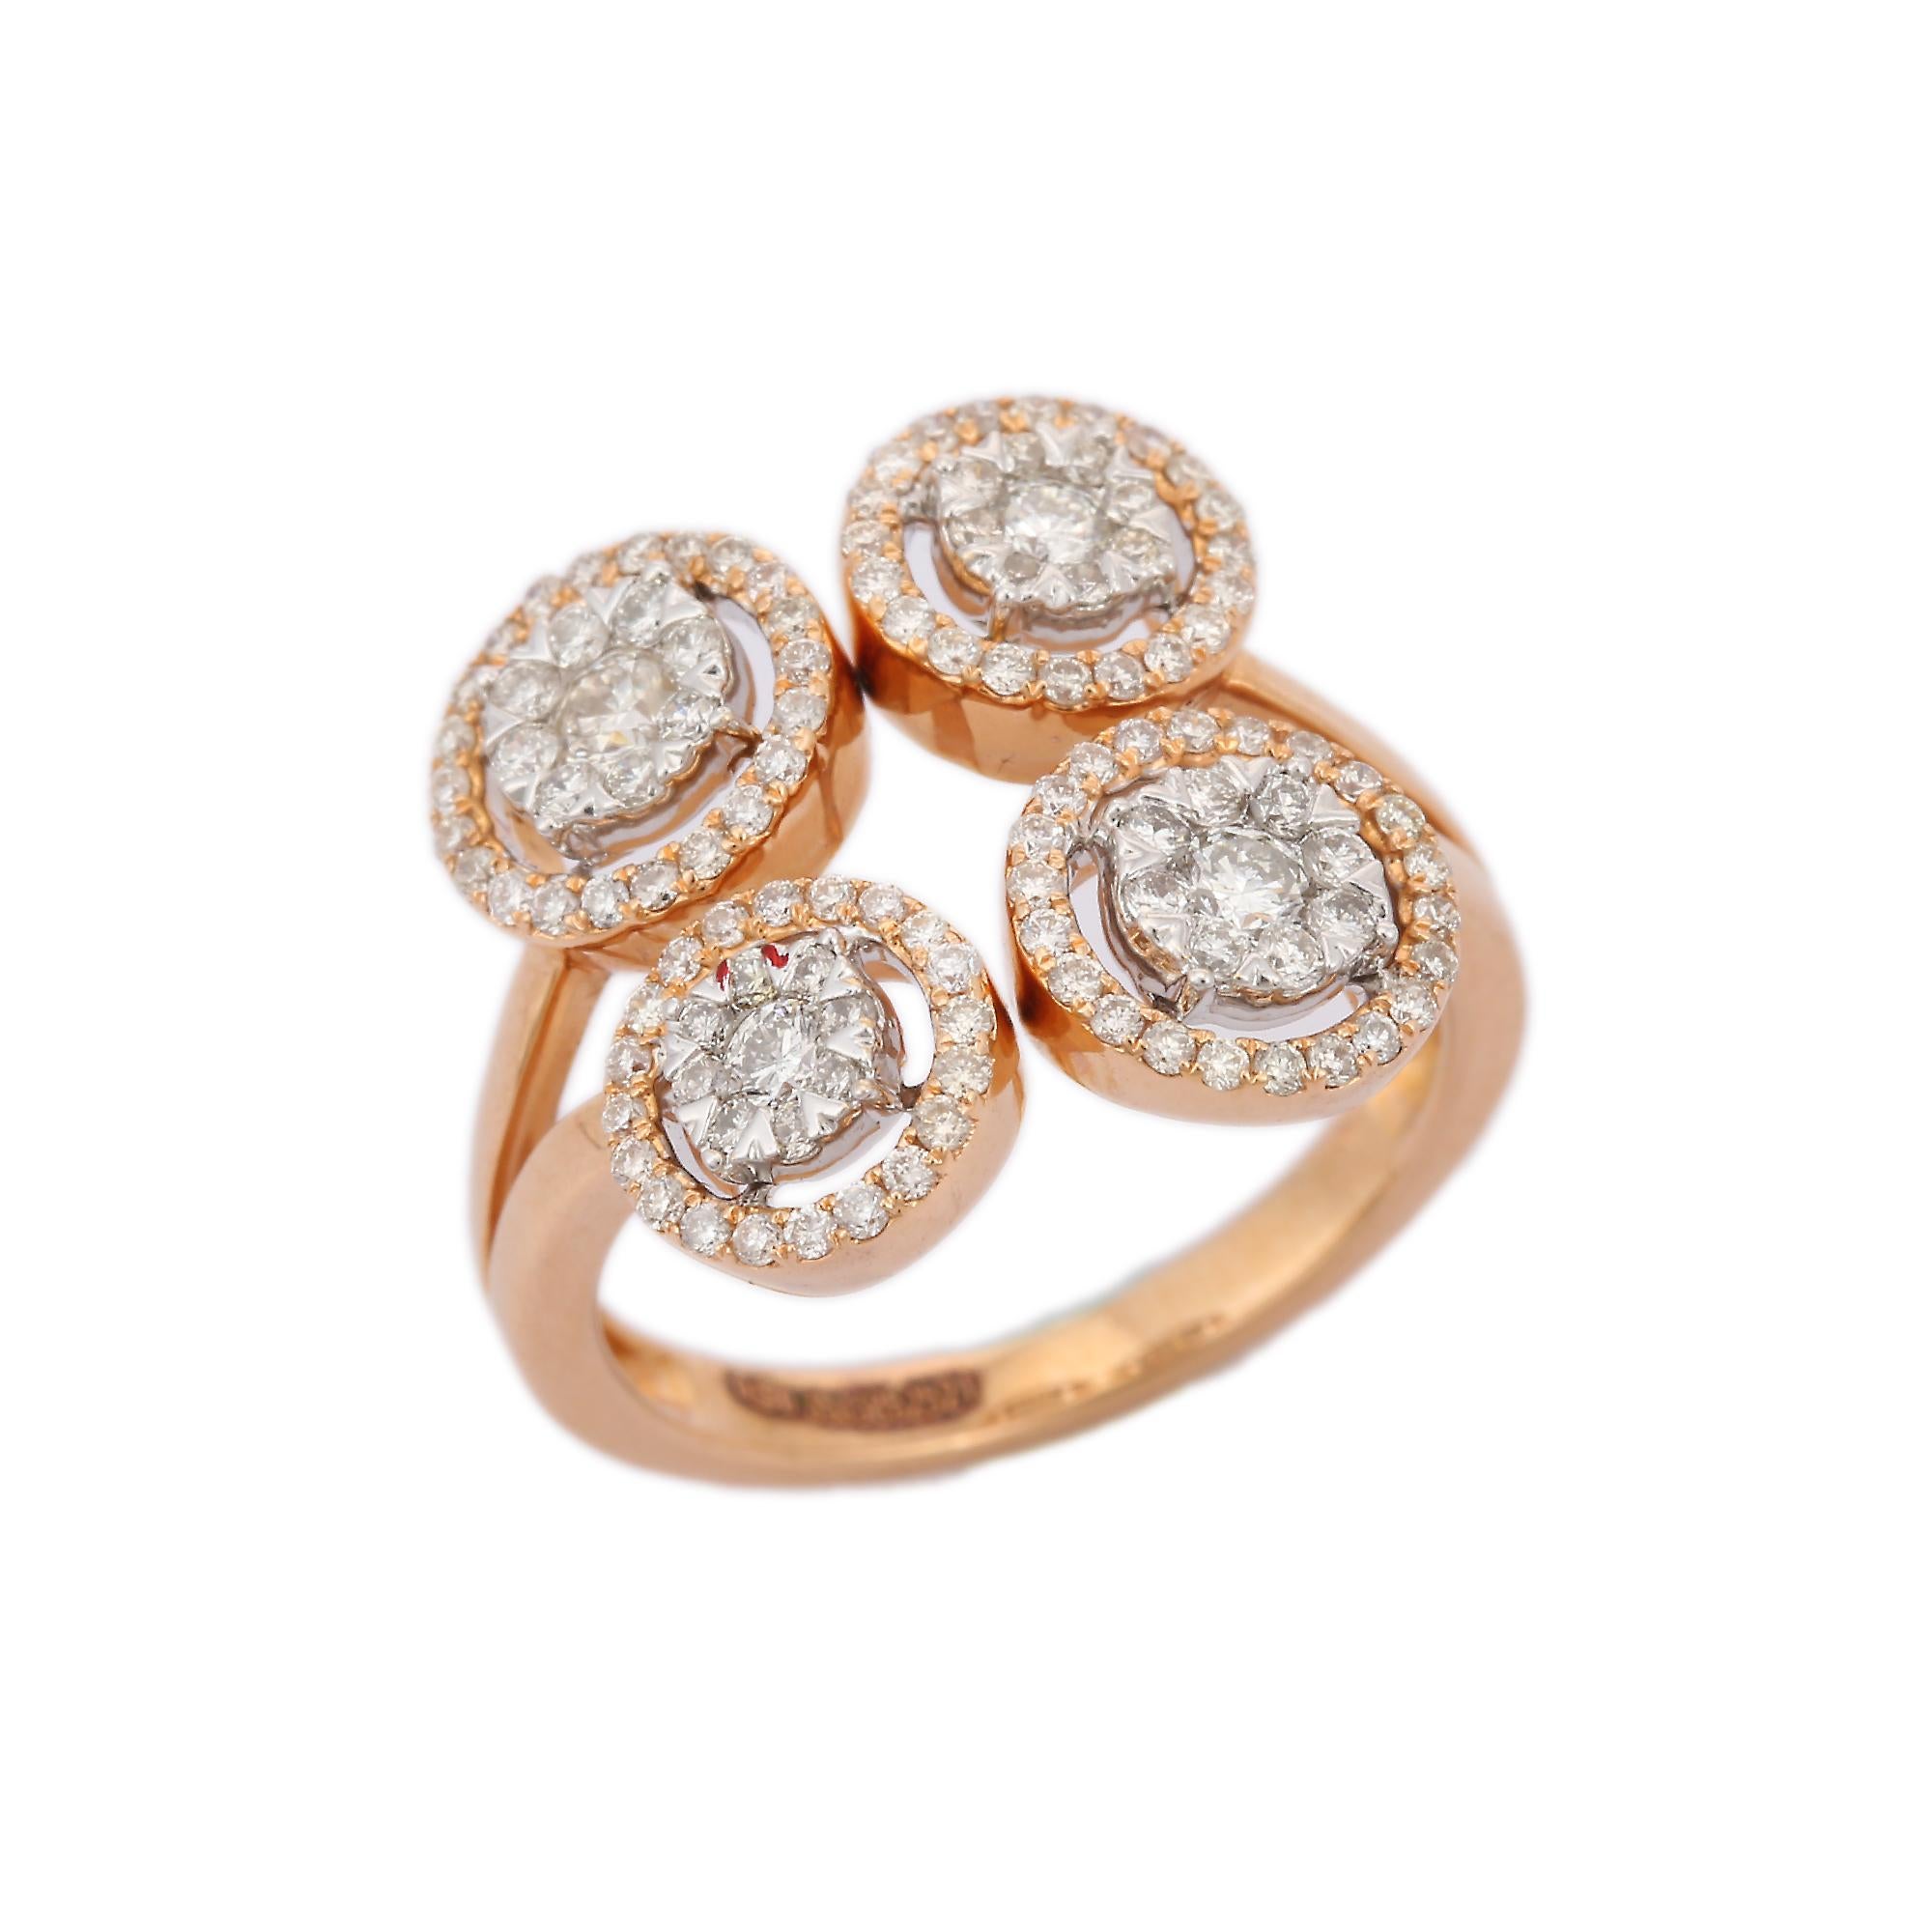 For Sale:  Statement Illusion Diamond Wedding Cluster Ring in 18K Solid Rose Gold 2